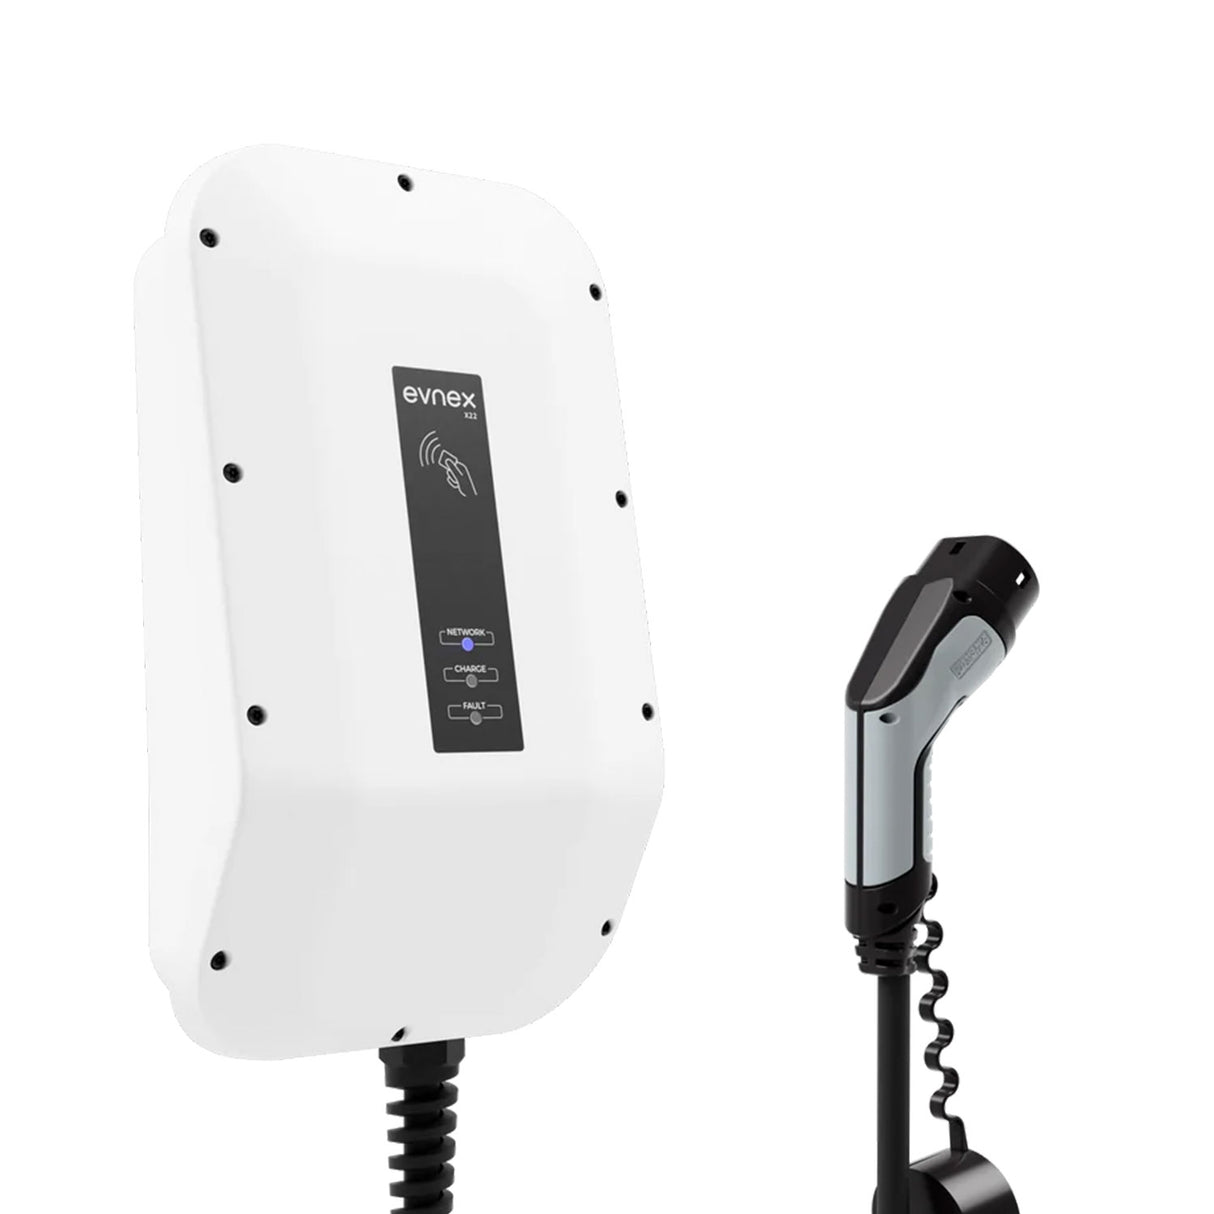 Evnex X Series Smart EV Charger 22kW with Type 2 Cable - White